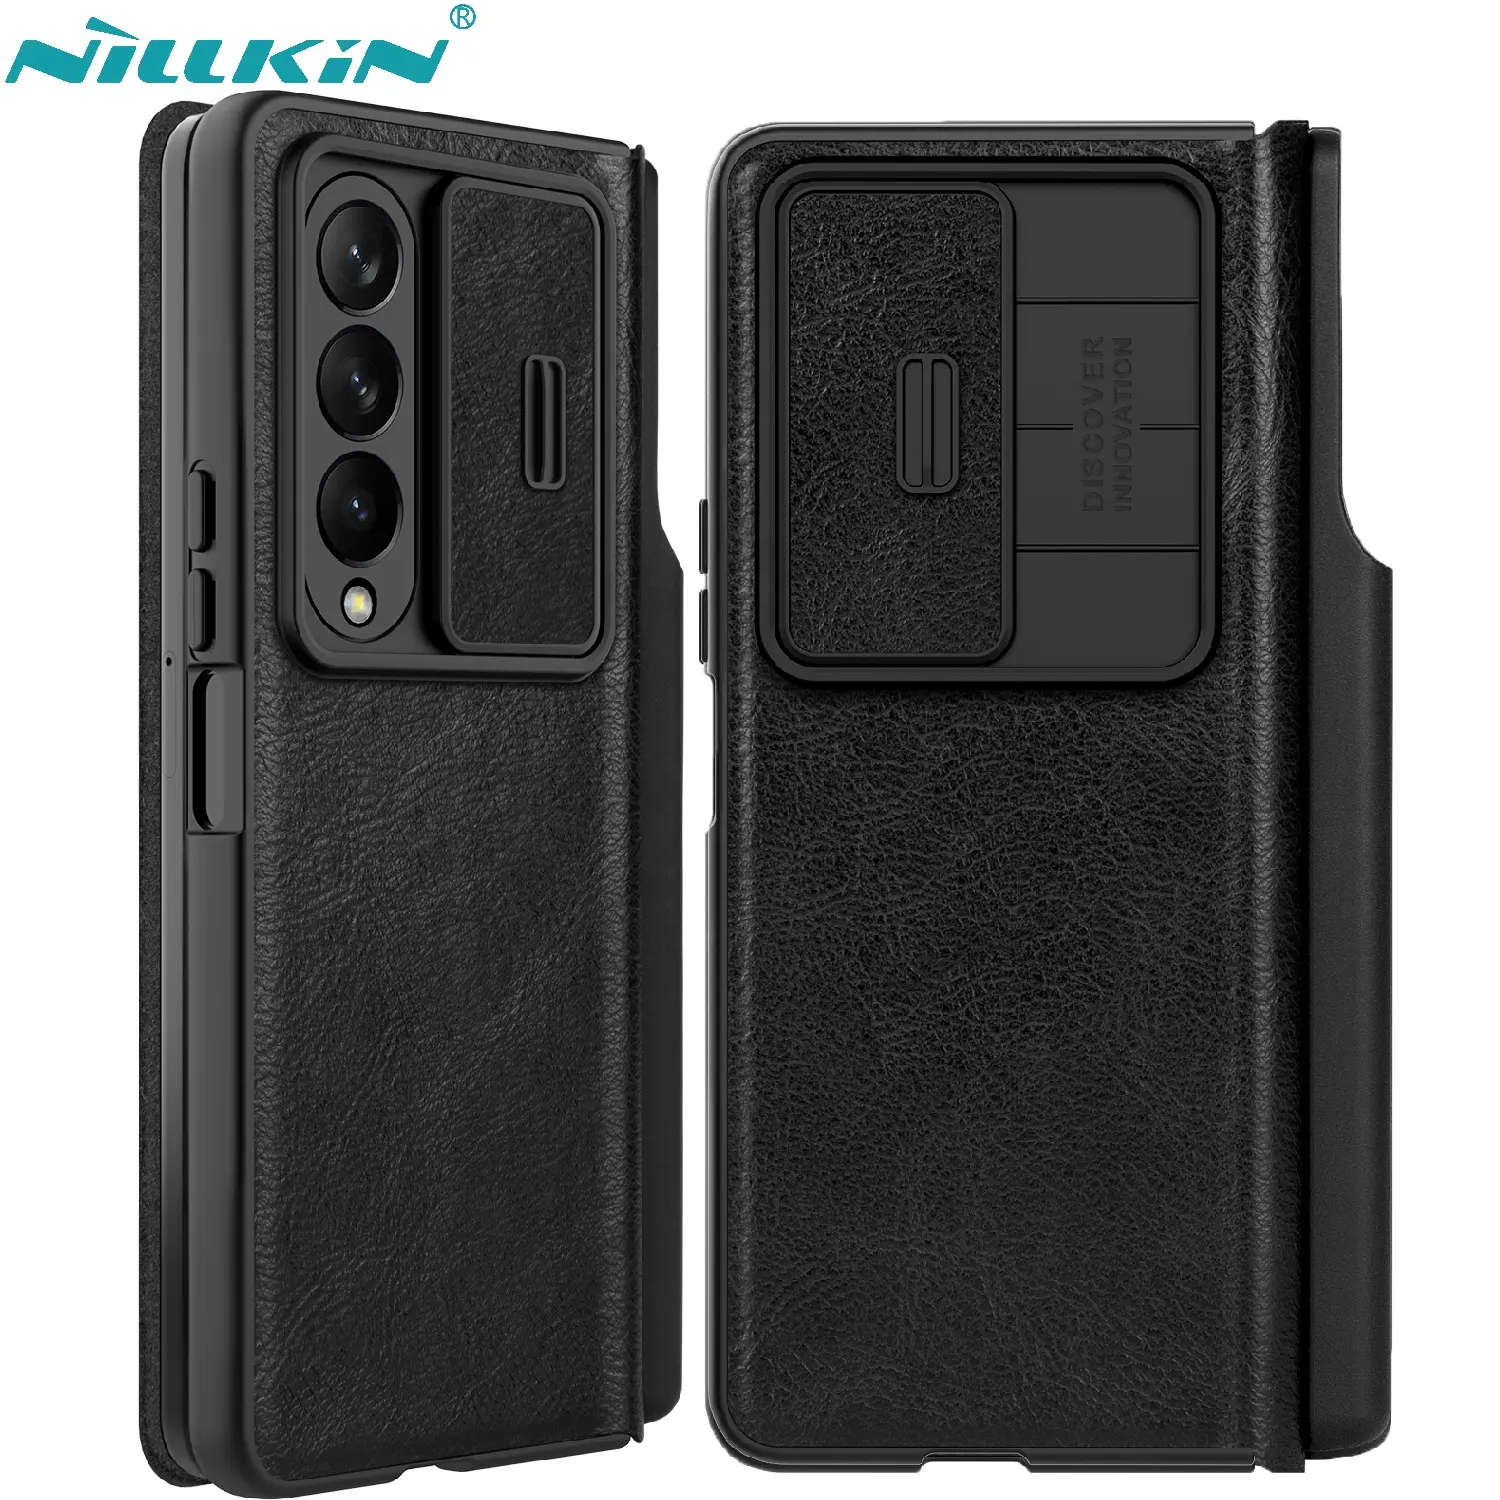 NILLKIN Qin Flip Leather Case For Samsung Galaxy Z Fold 4 5G Kickstand With S Pen Pocket For Z Fold 4 Slide Camera Back Cover